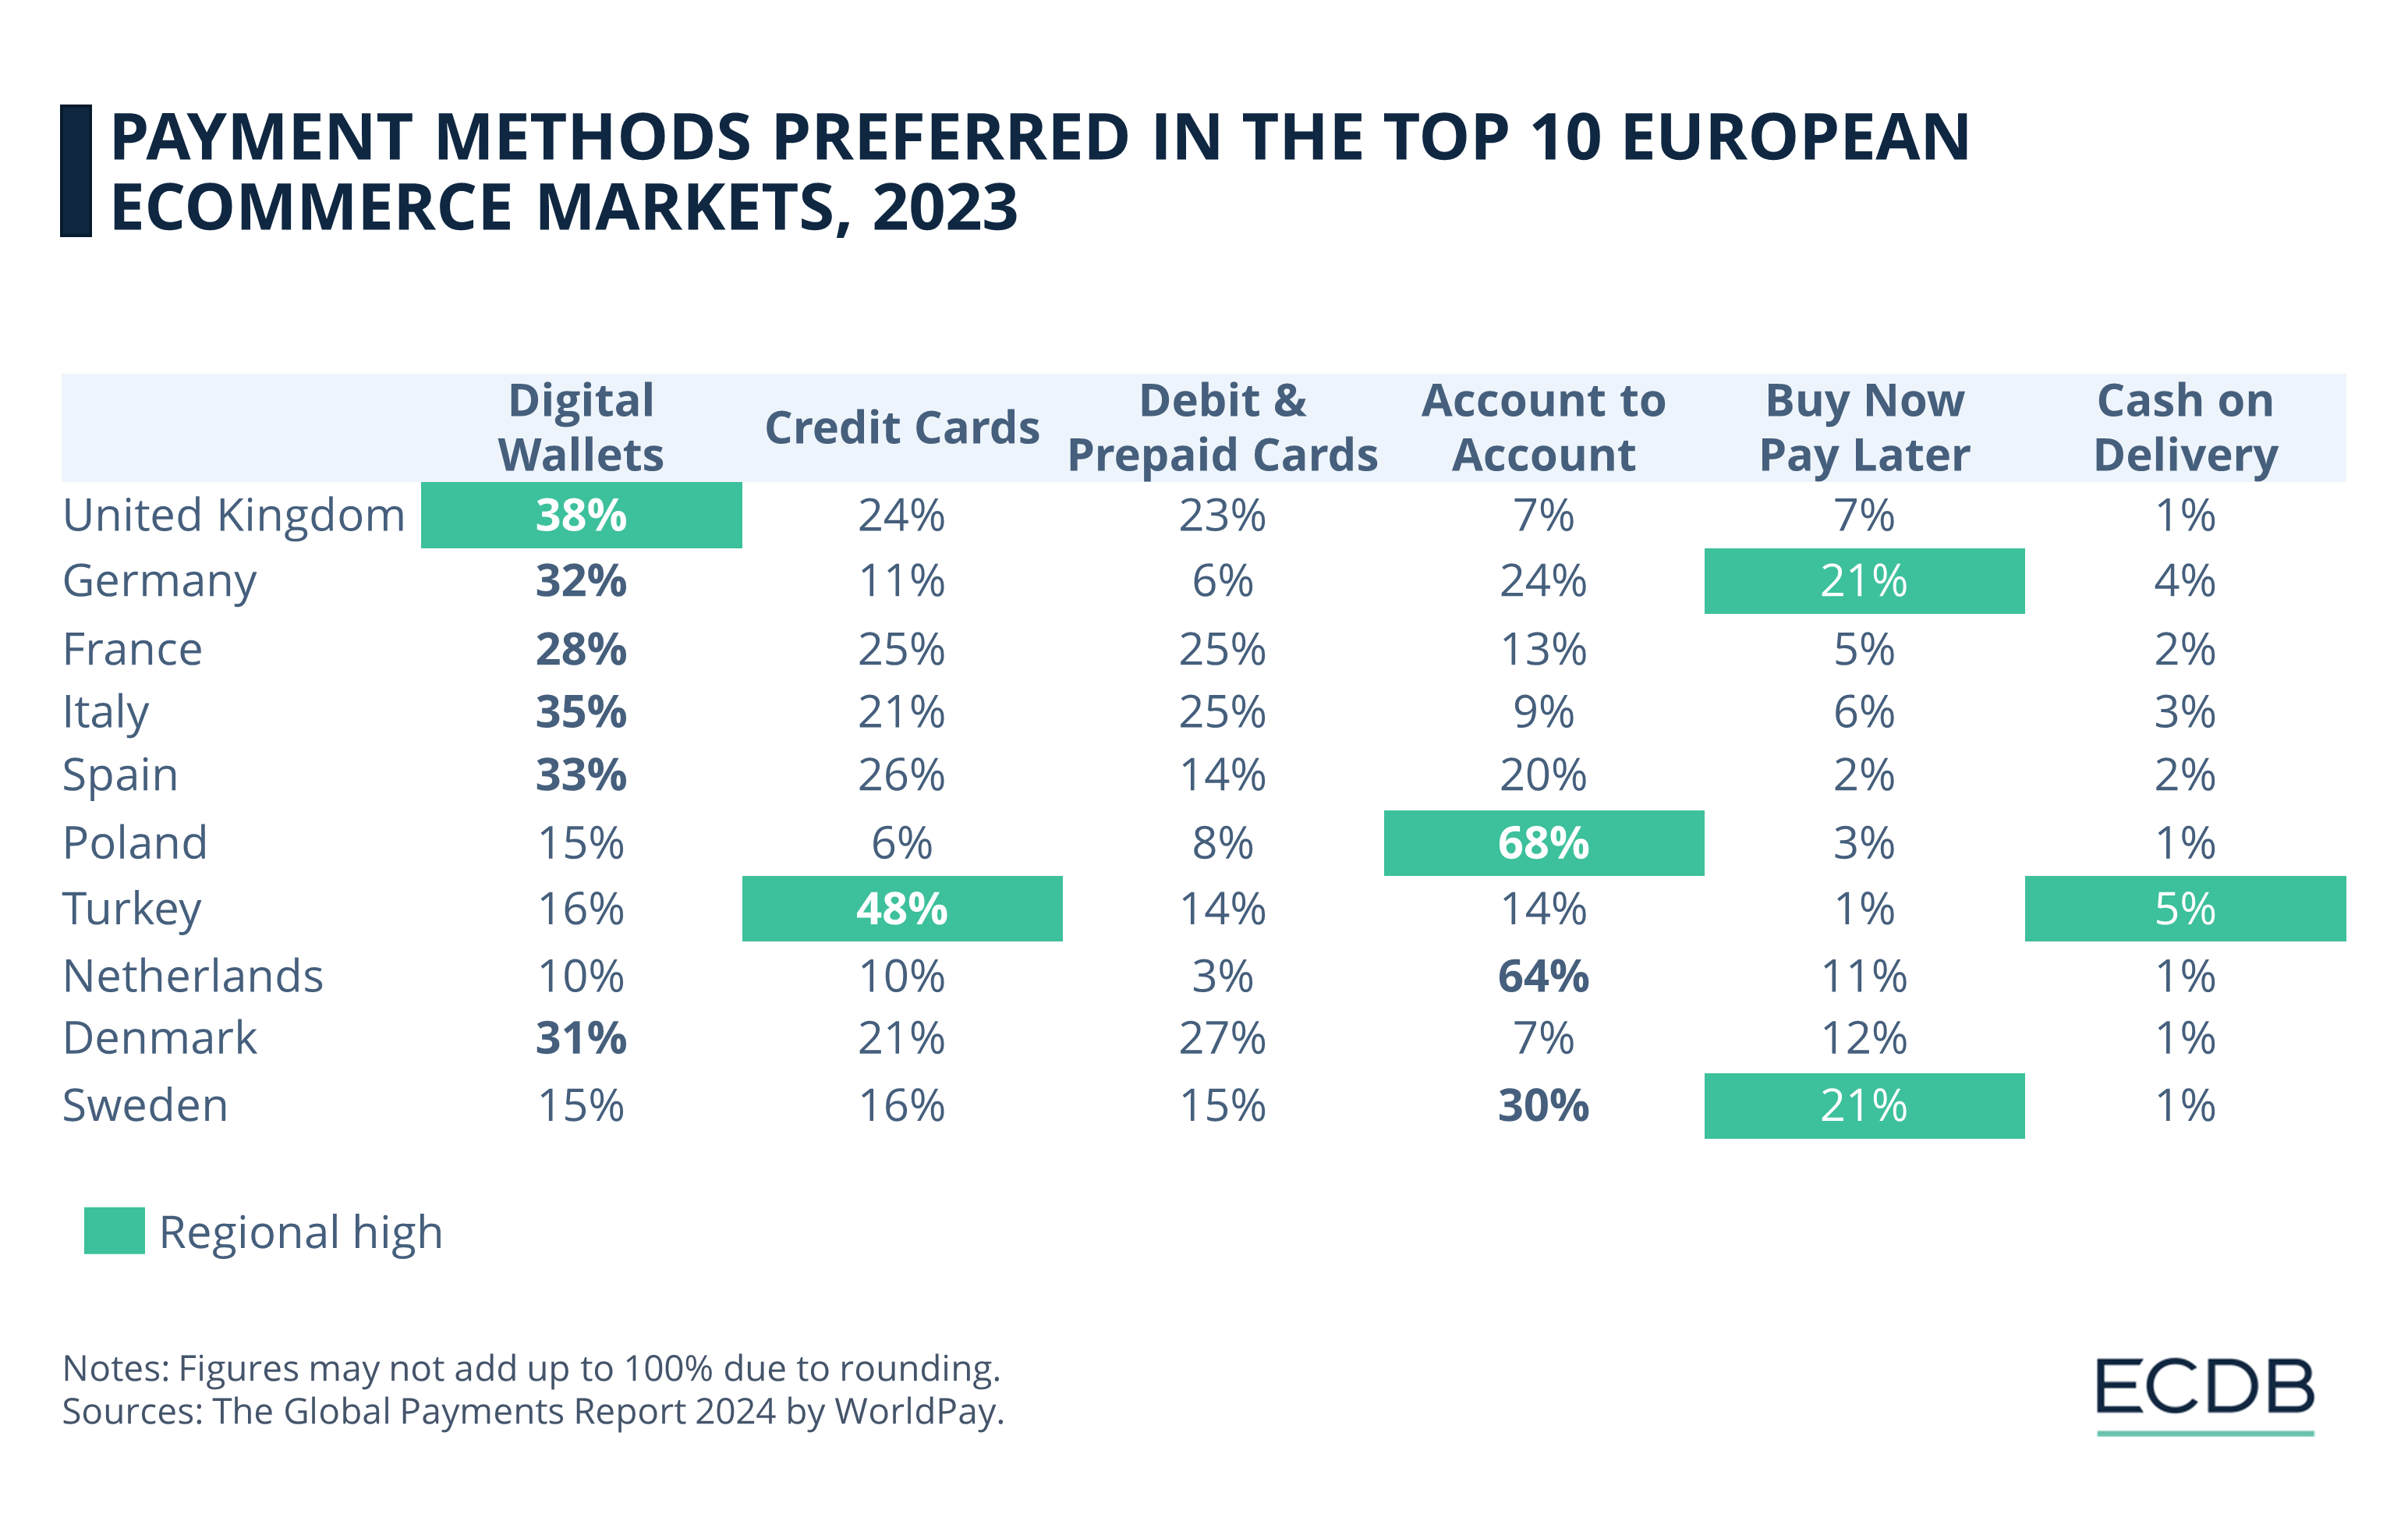 Payment Methods Preferred in the Top 10 European eCommerce Markets, 2023